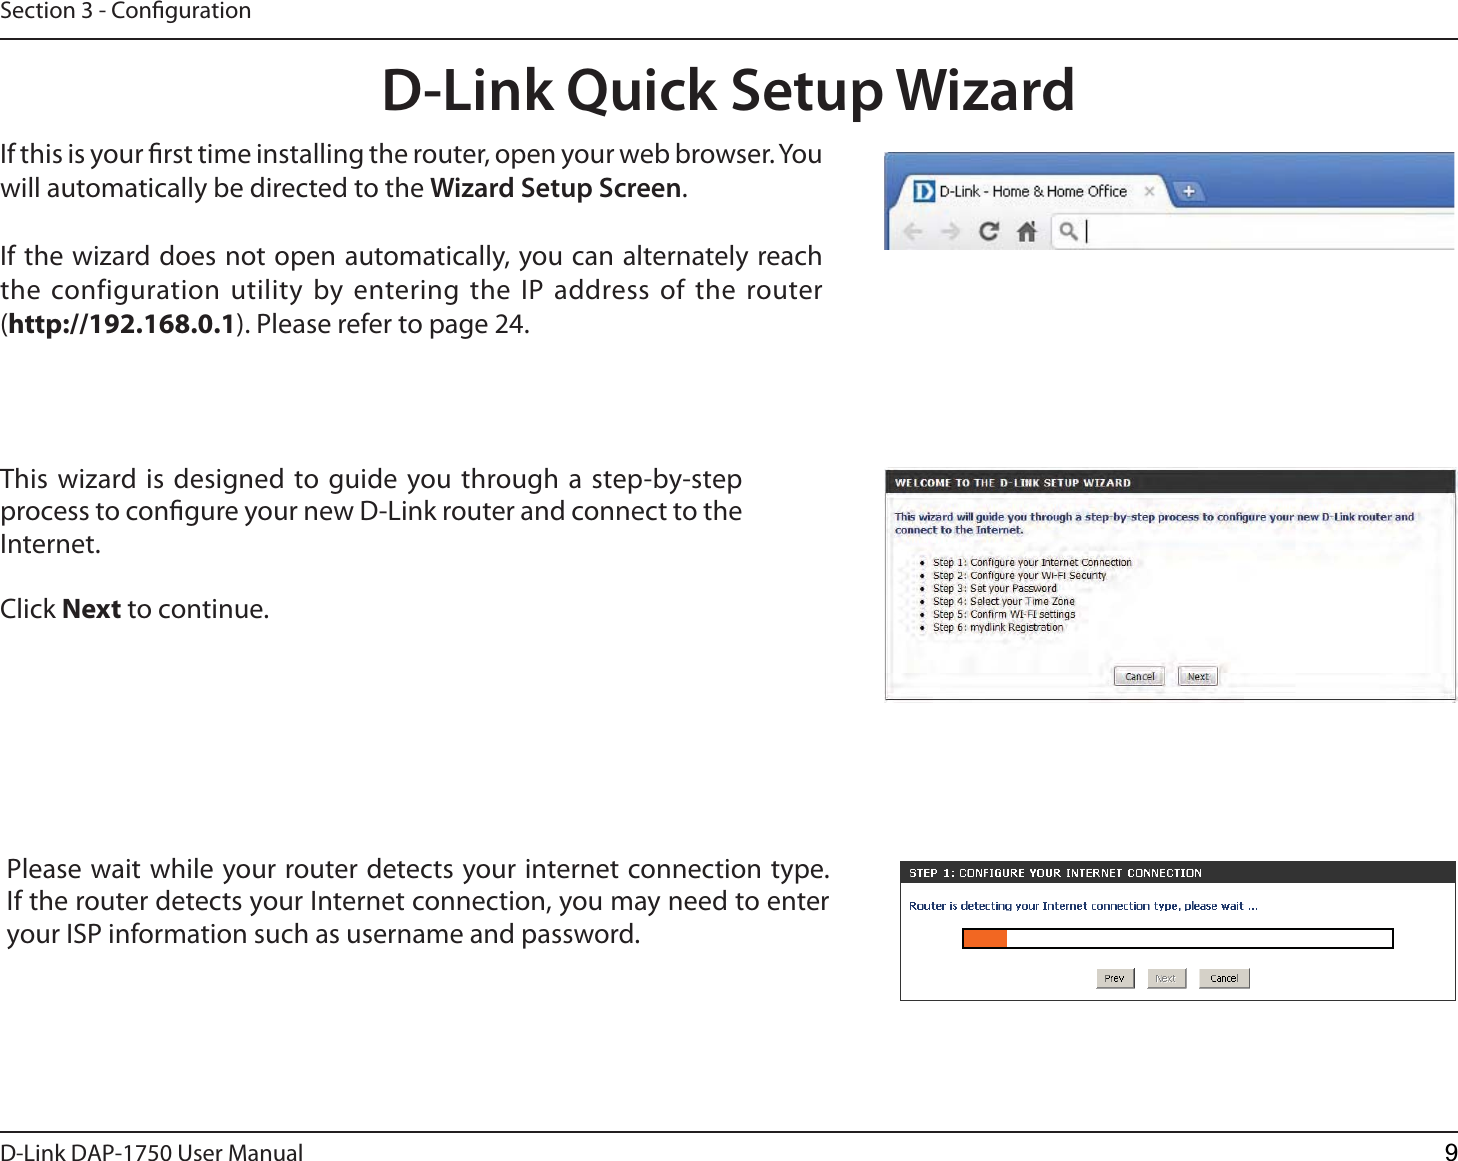 D-Link %&quot;1 User ManualSection 3 - CongurationThis wizard is designed to guide you through a step-by-step process to congure your new D-Link router and connect to the Internet.Click Next to continue. D-Link Quick Setup WizardIf this is your rst time installing the router, open your web browser. You will automatically be directed to the Wizard Setup Screen. If the wizard does not open automatically, you can alternately reach the configuration utility by entering the IP address of the router (http://192.168.0.1). Please refer to page 24.Please wait while your router detects your internet connection type. If the router detects your Internet connection, you may need to enter your ISP information such as username and password.9